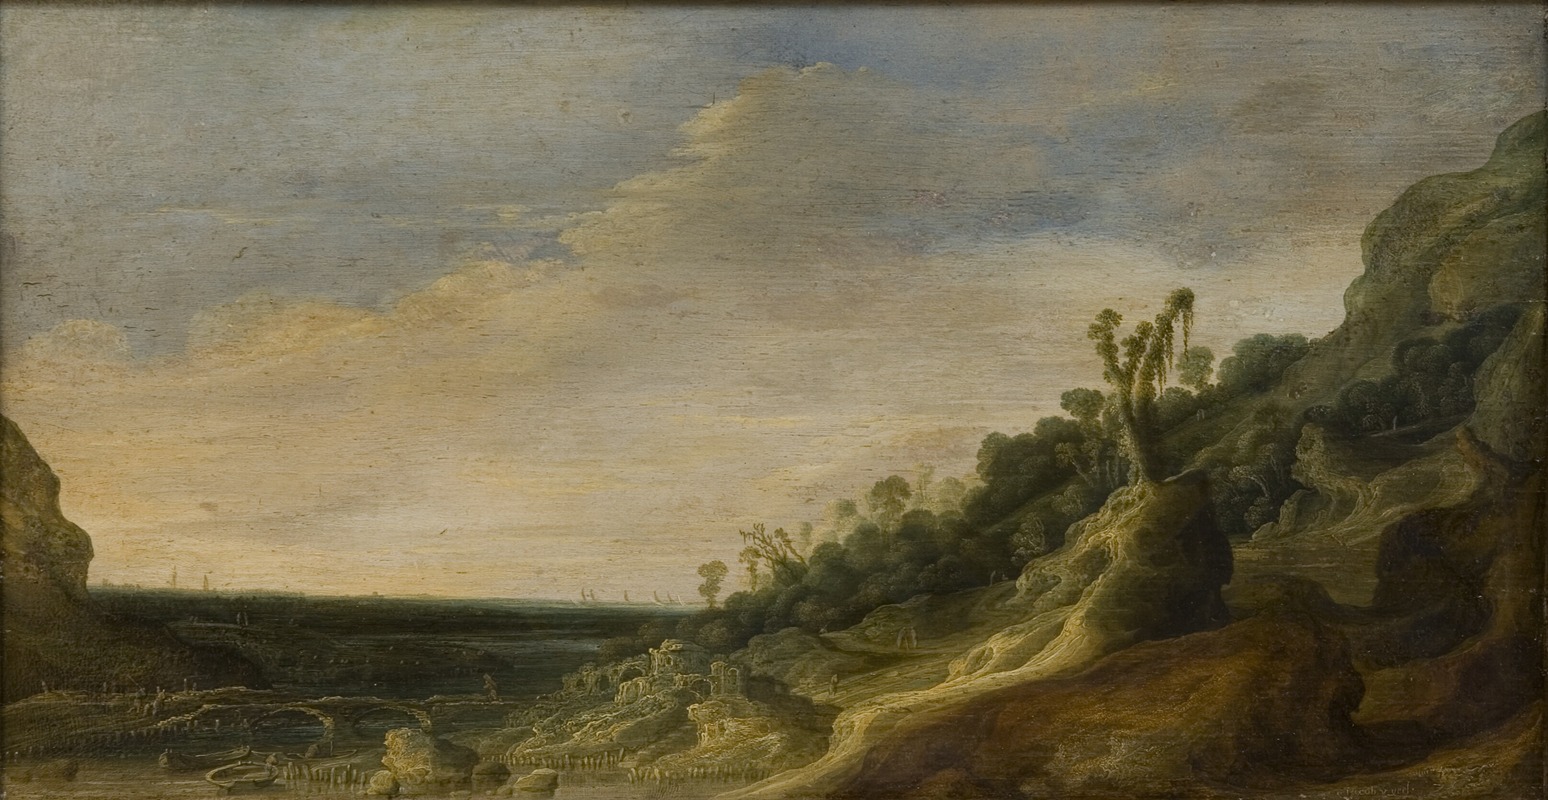 Jacob van Geel - Mountain Scenery with a View of a River and the Sea